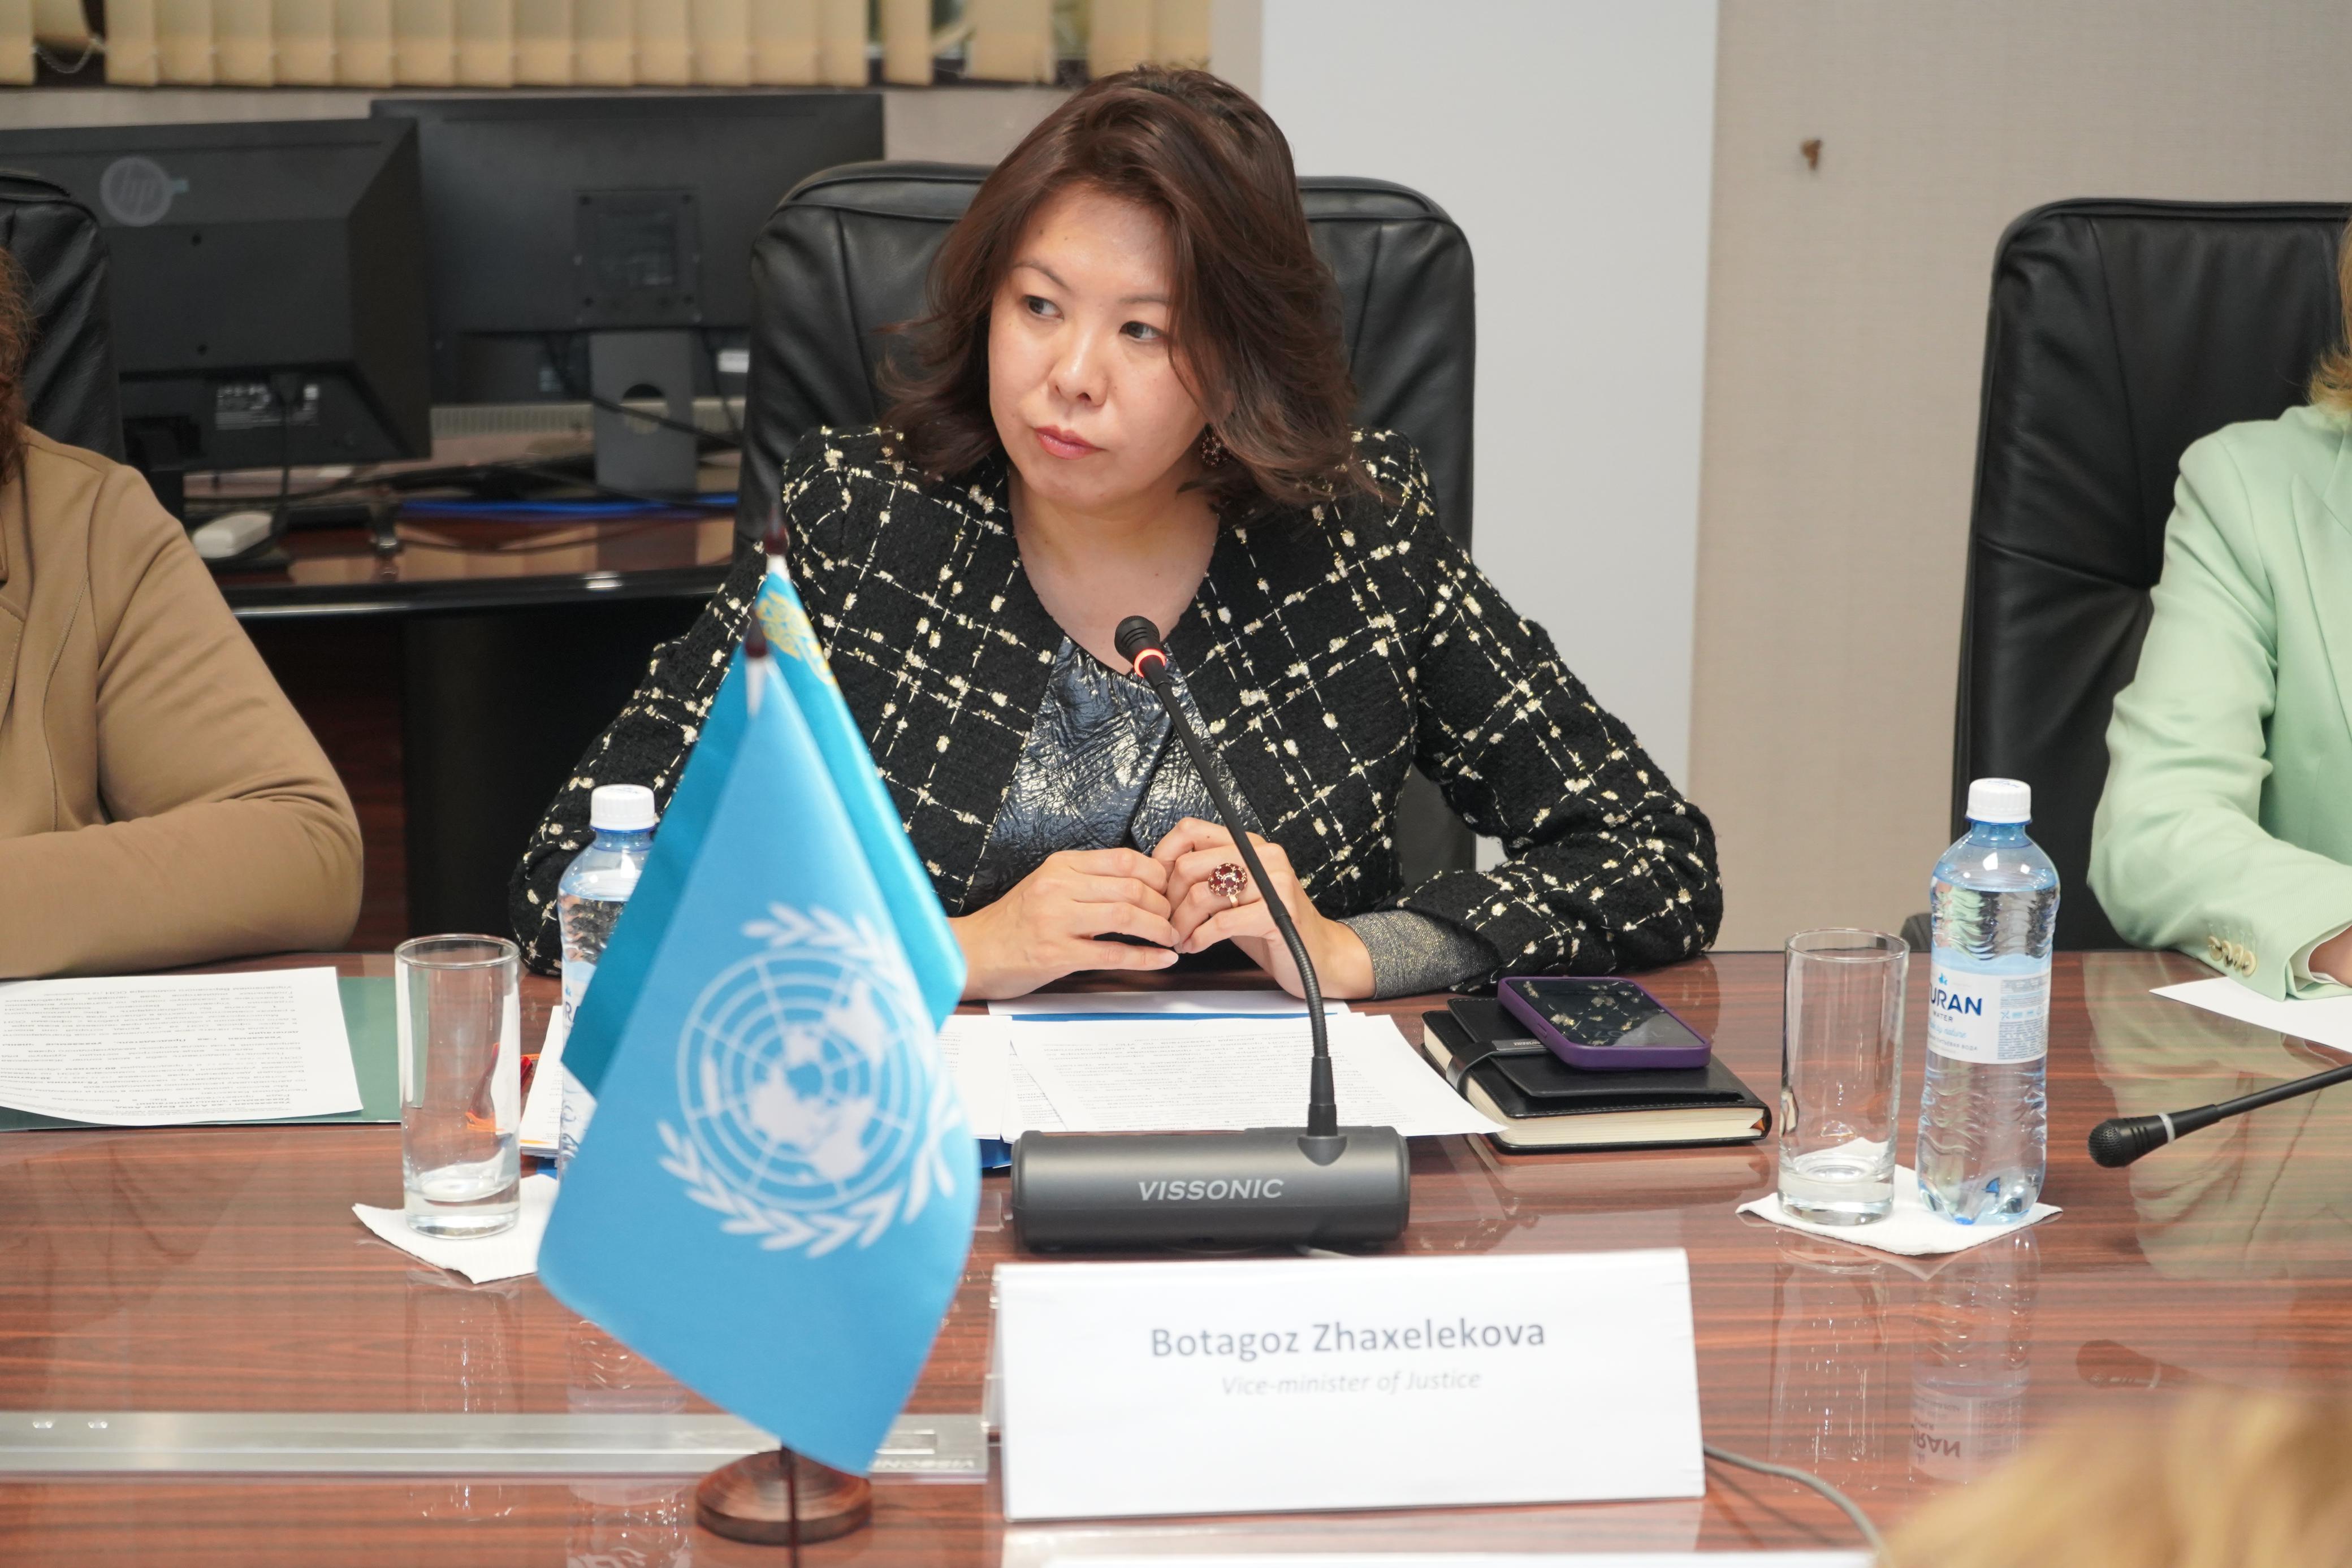 Vice-Minister Botagoz Zhaxselekova met with the Chairman of the Fund under the Office of the United Nations High Commissioner for Human Rights, Azita Berar Awad